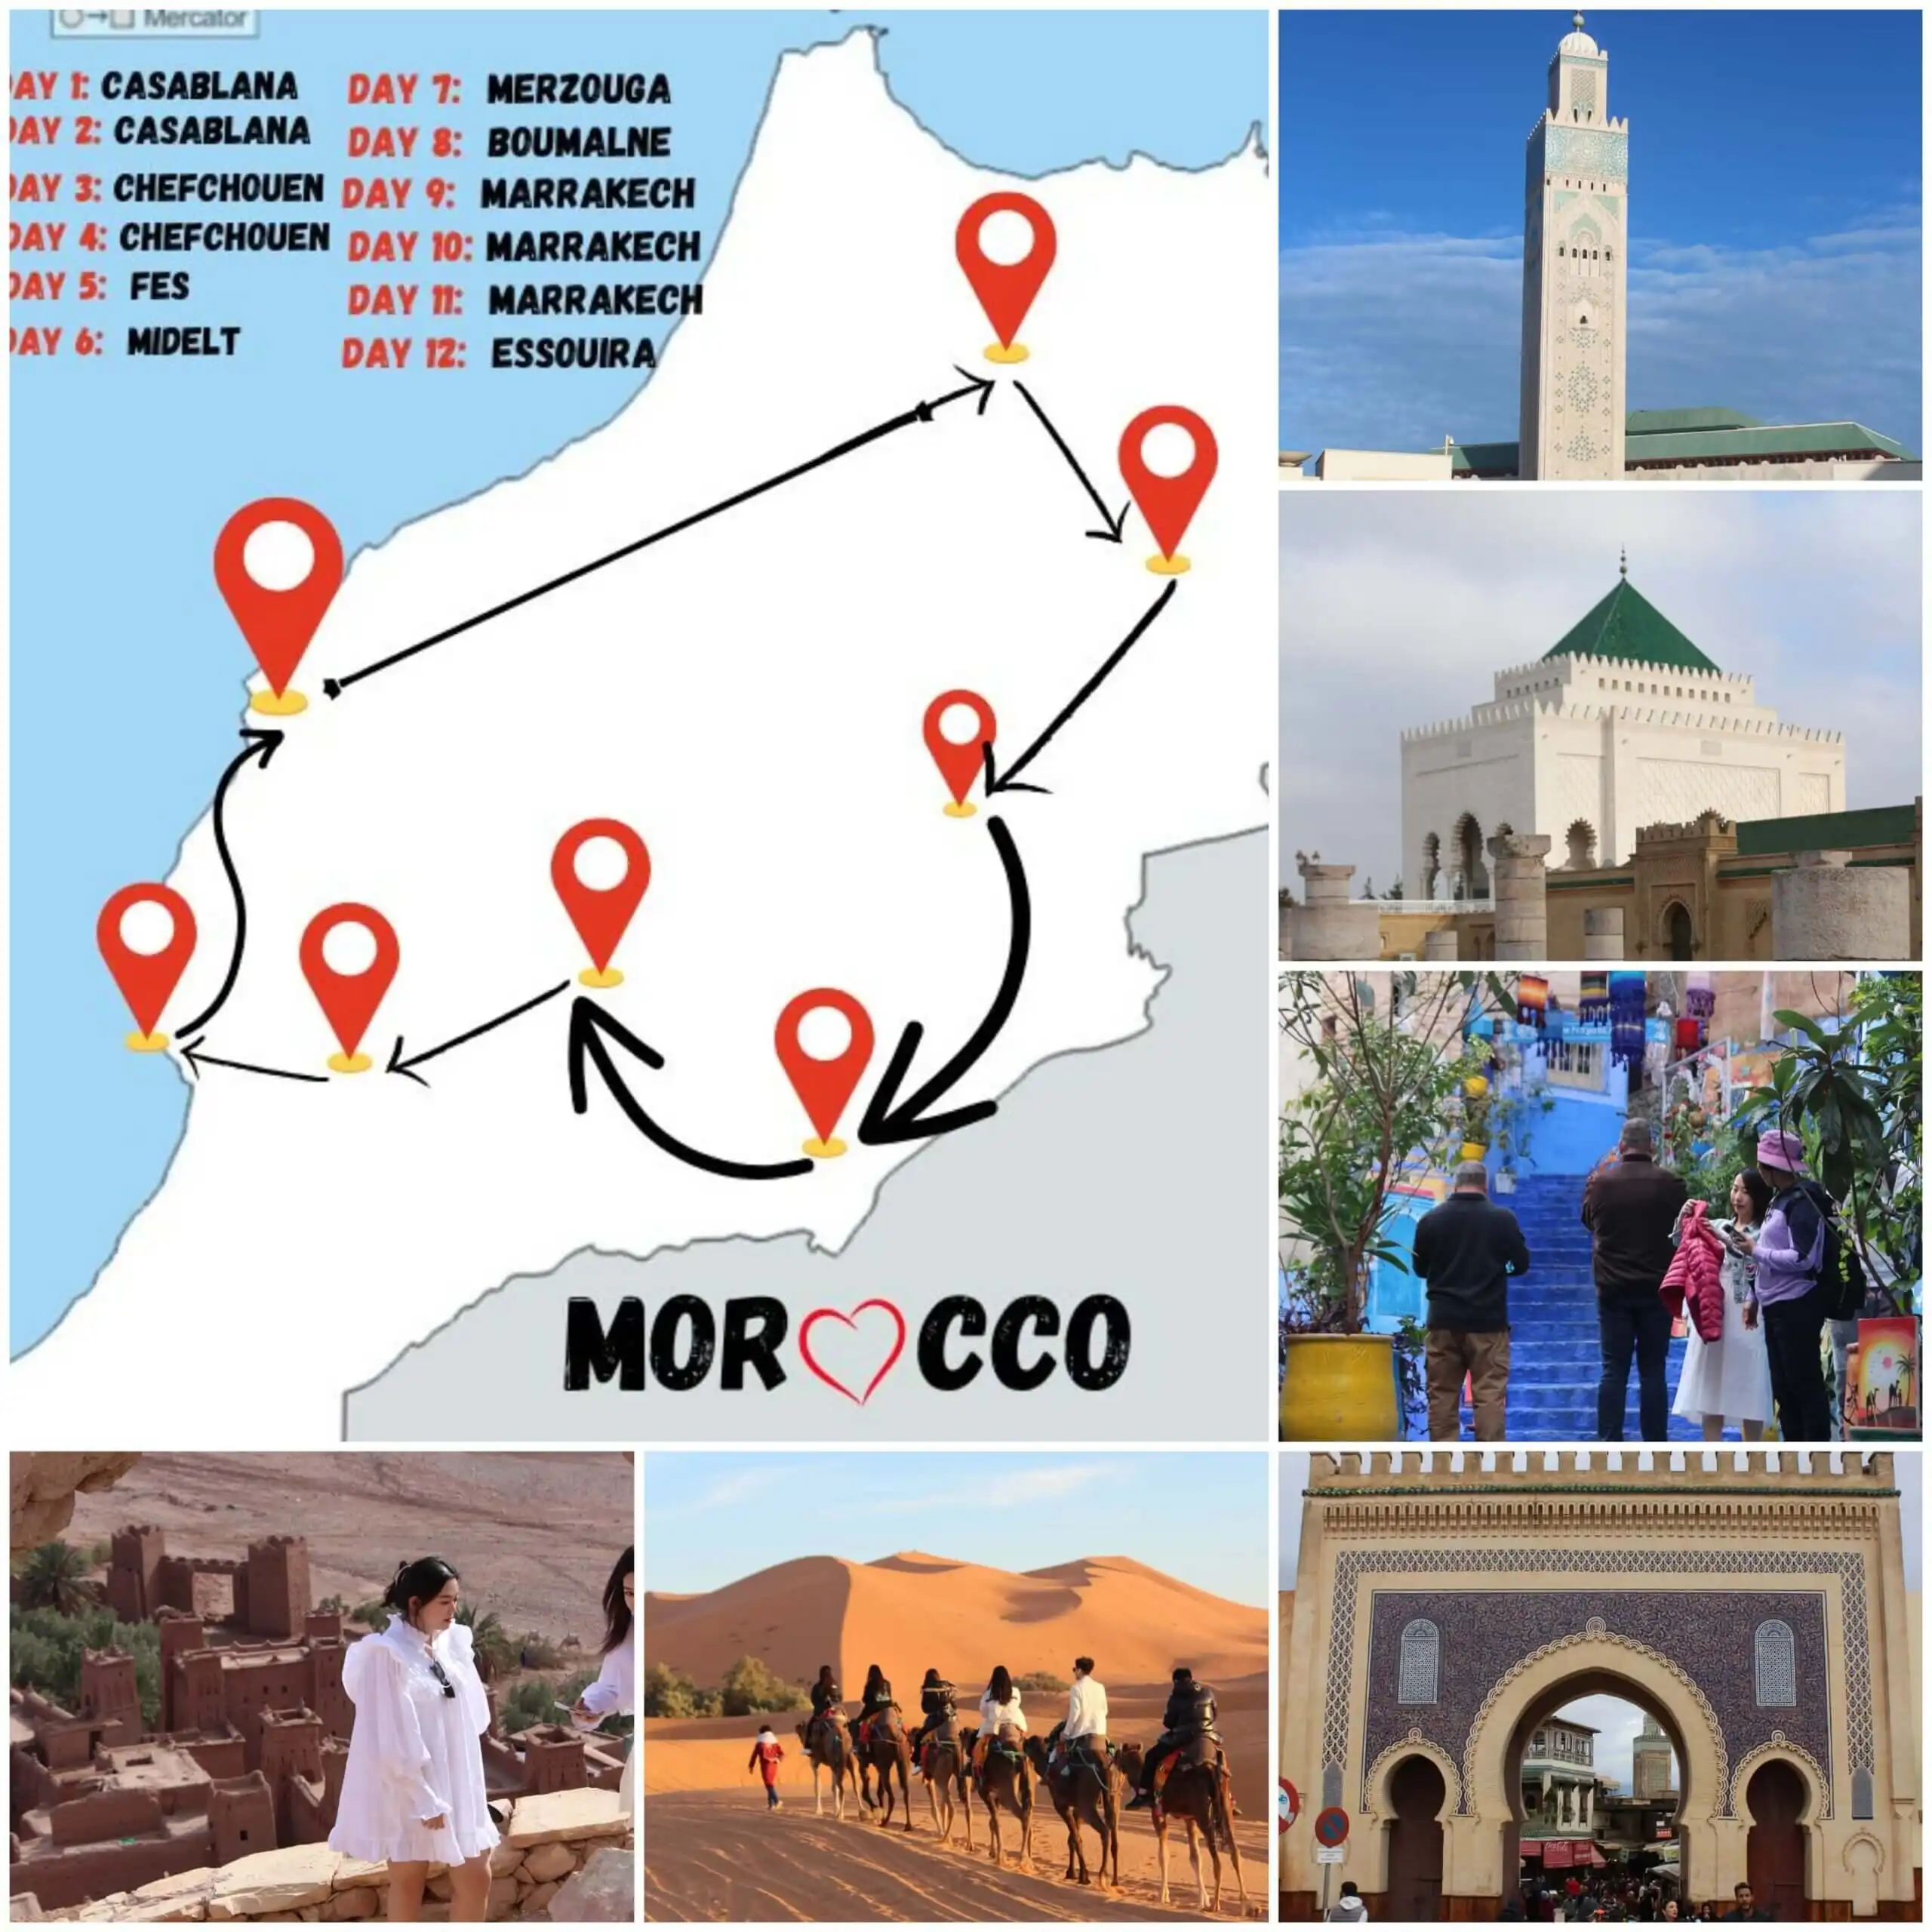 12 day tour from casablanca